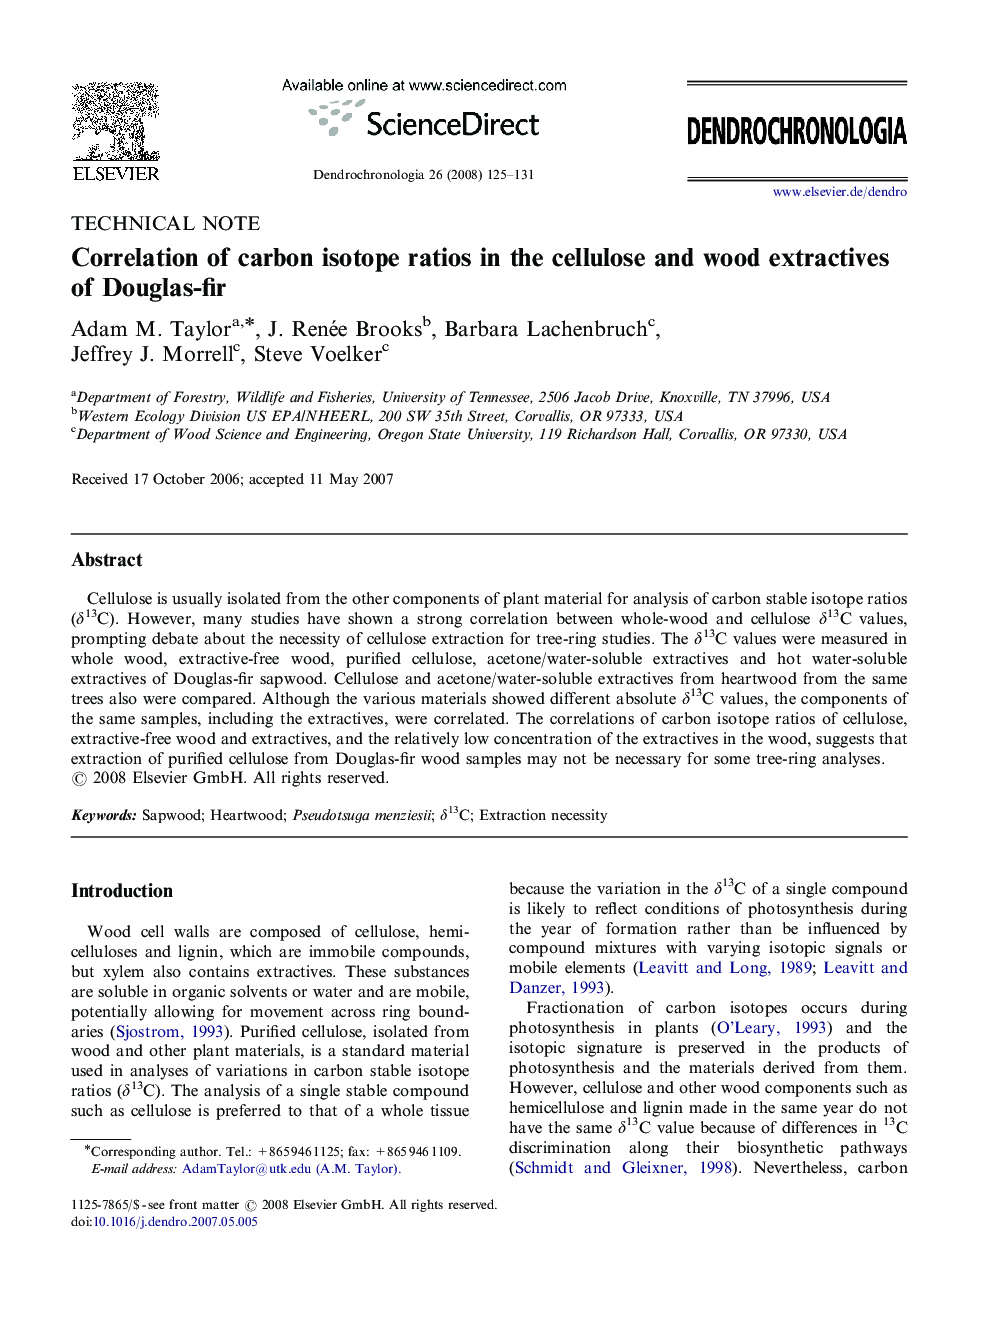 Correlation of carbon isotope ratios in the cellulose and wood extractives of Douglas-fir